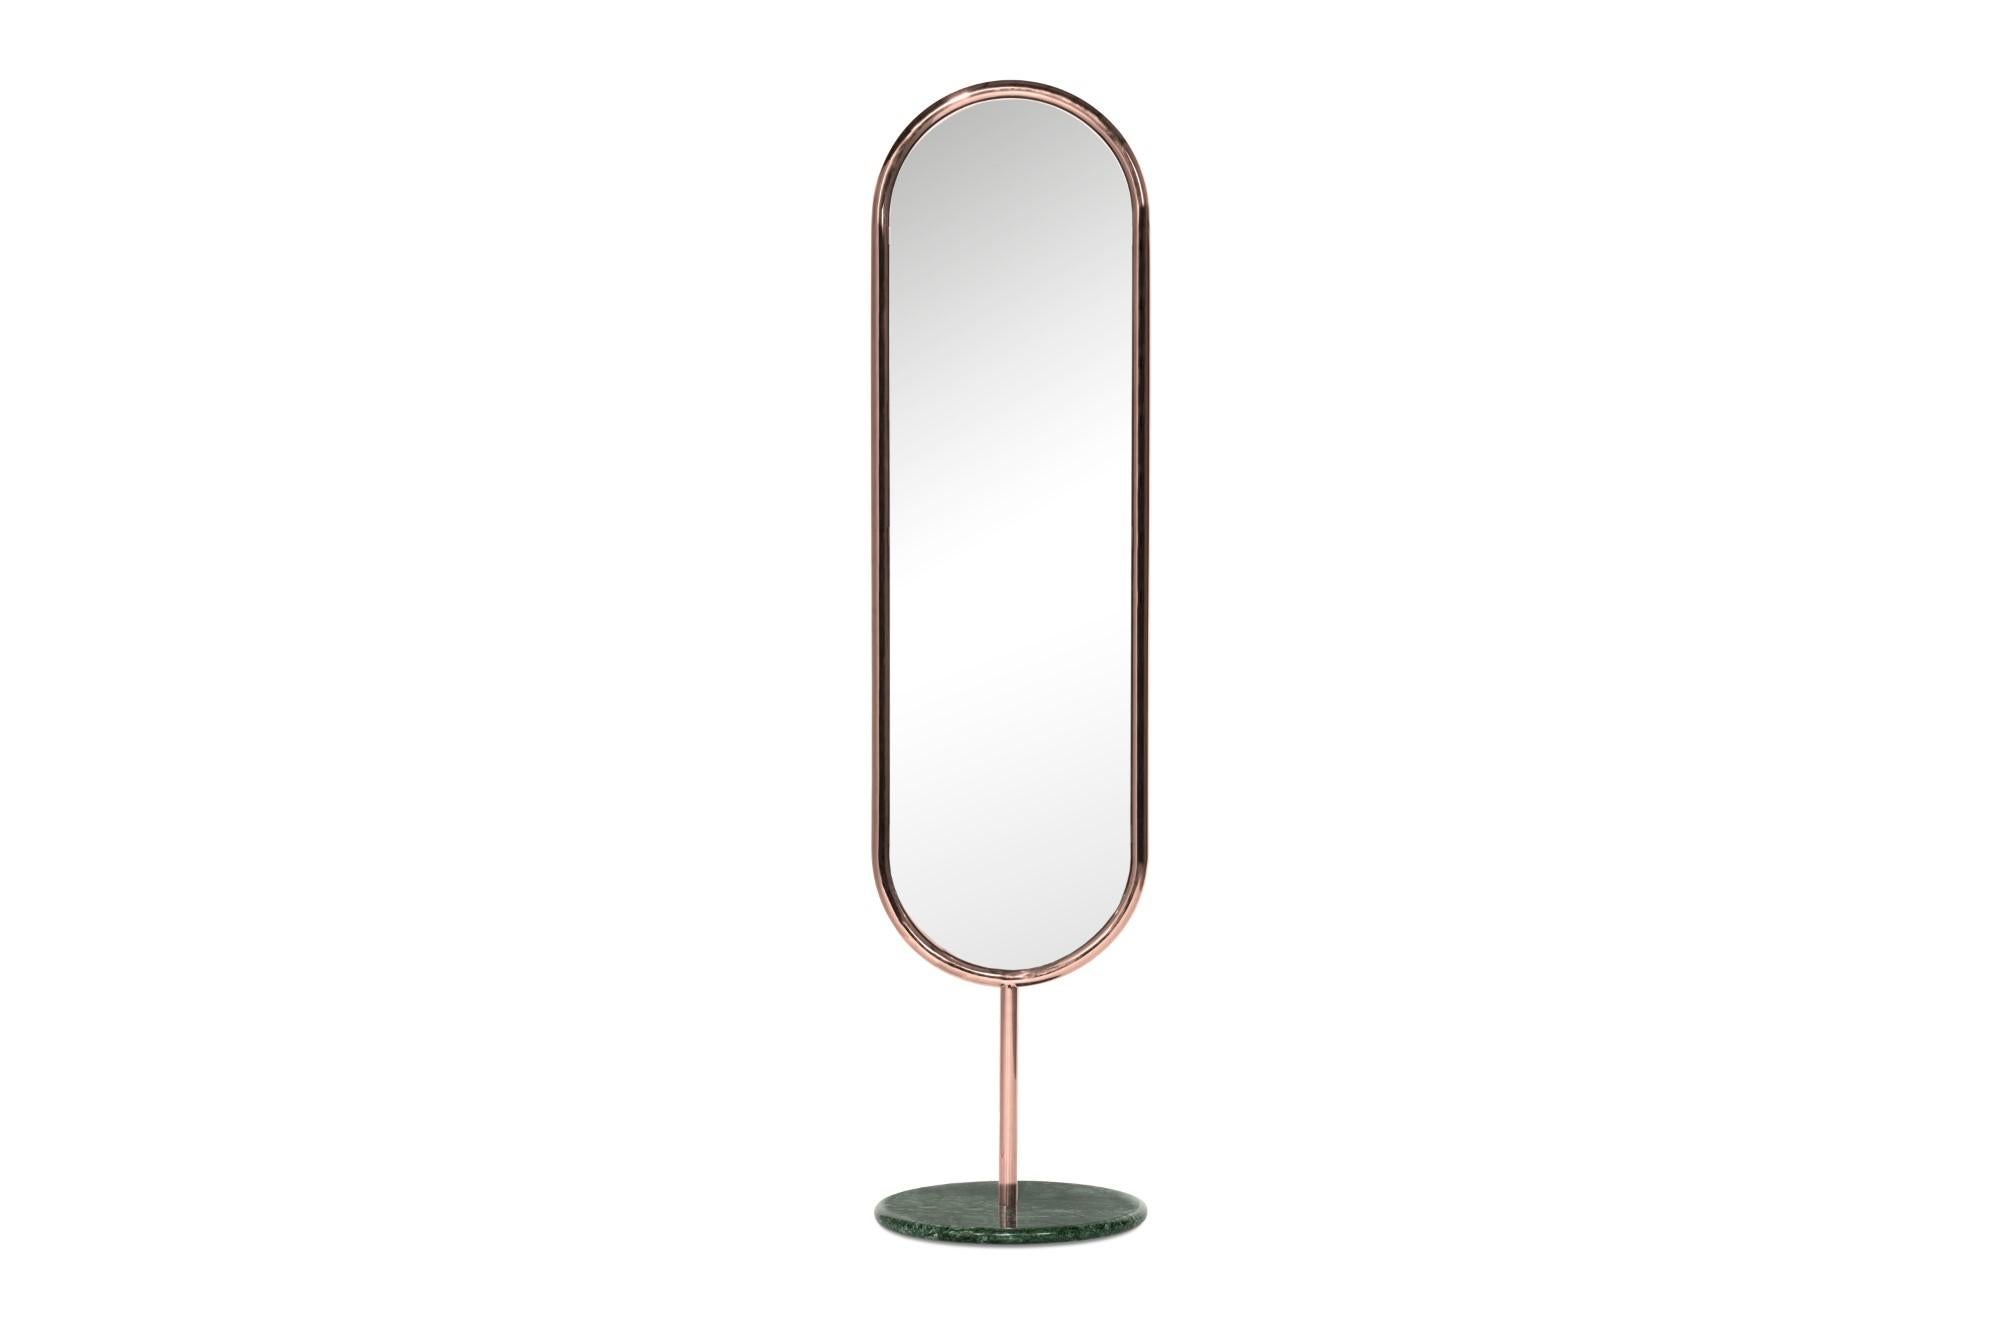 Copper and green marble marshmallow floor mirror, Royal Stranger
Dimensions: 183 x 44 x 44 cm
Materials: Polished brass structure standing on the top of a Guatemala Green marble.

Available in brass, stainless steel, and copper with polished or